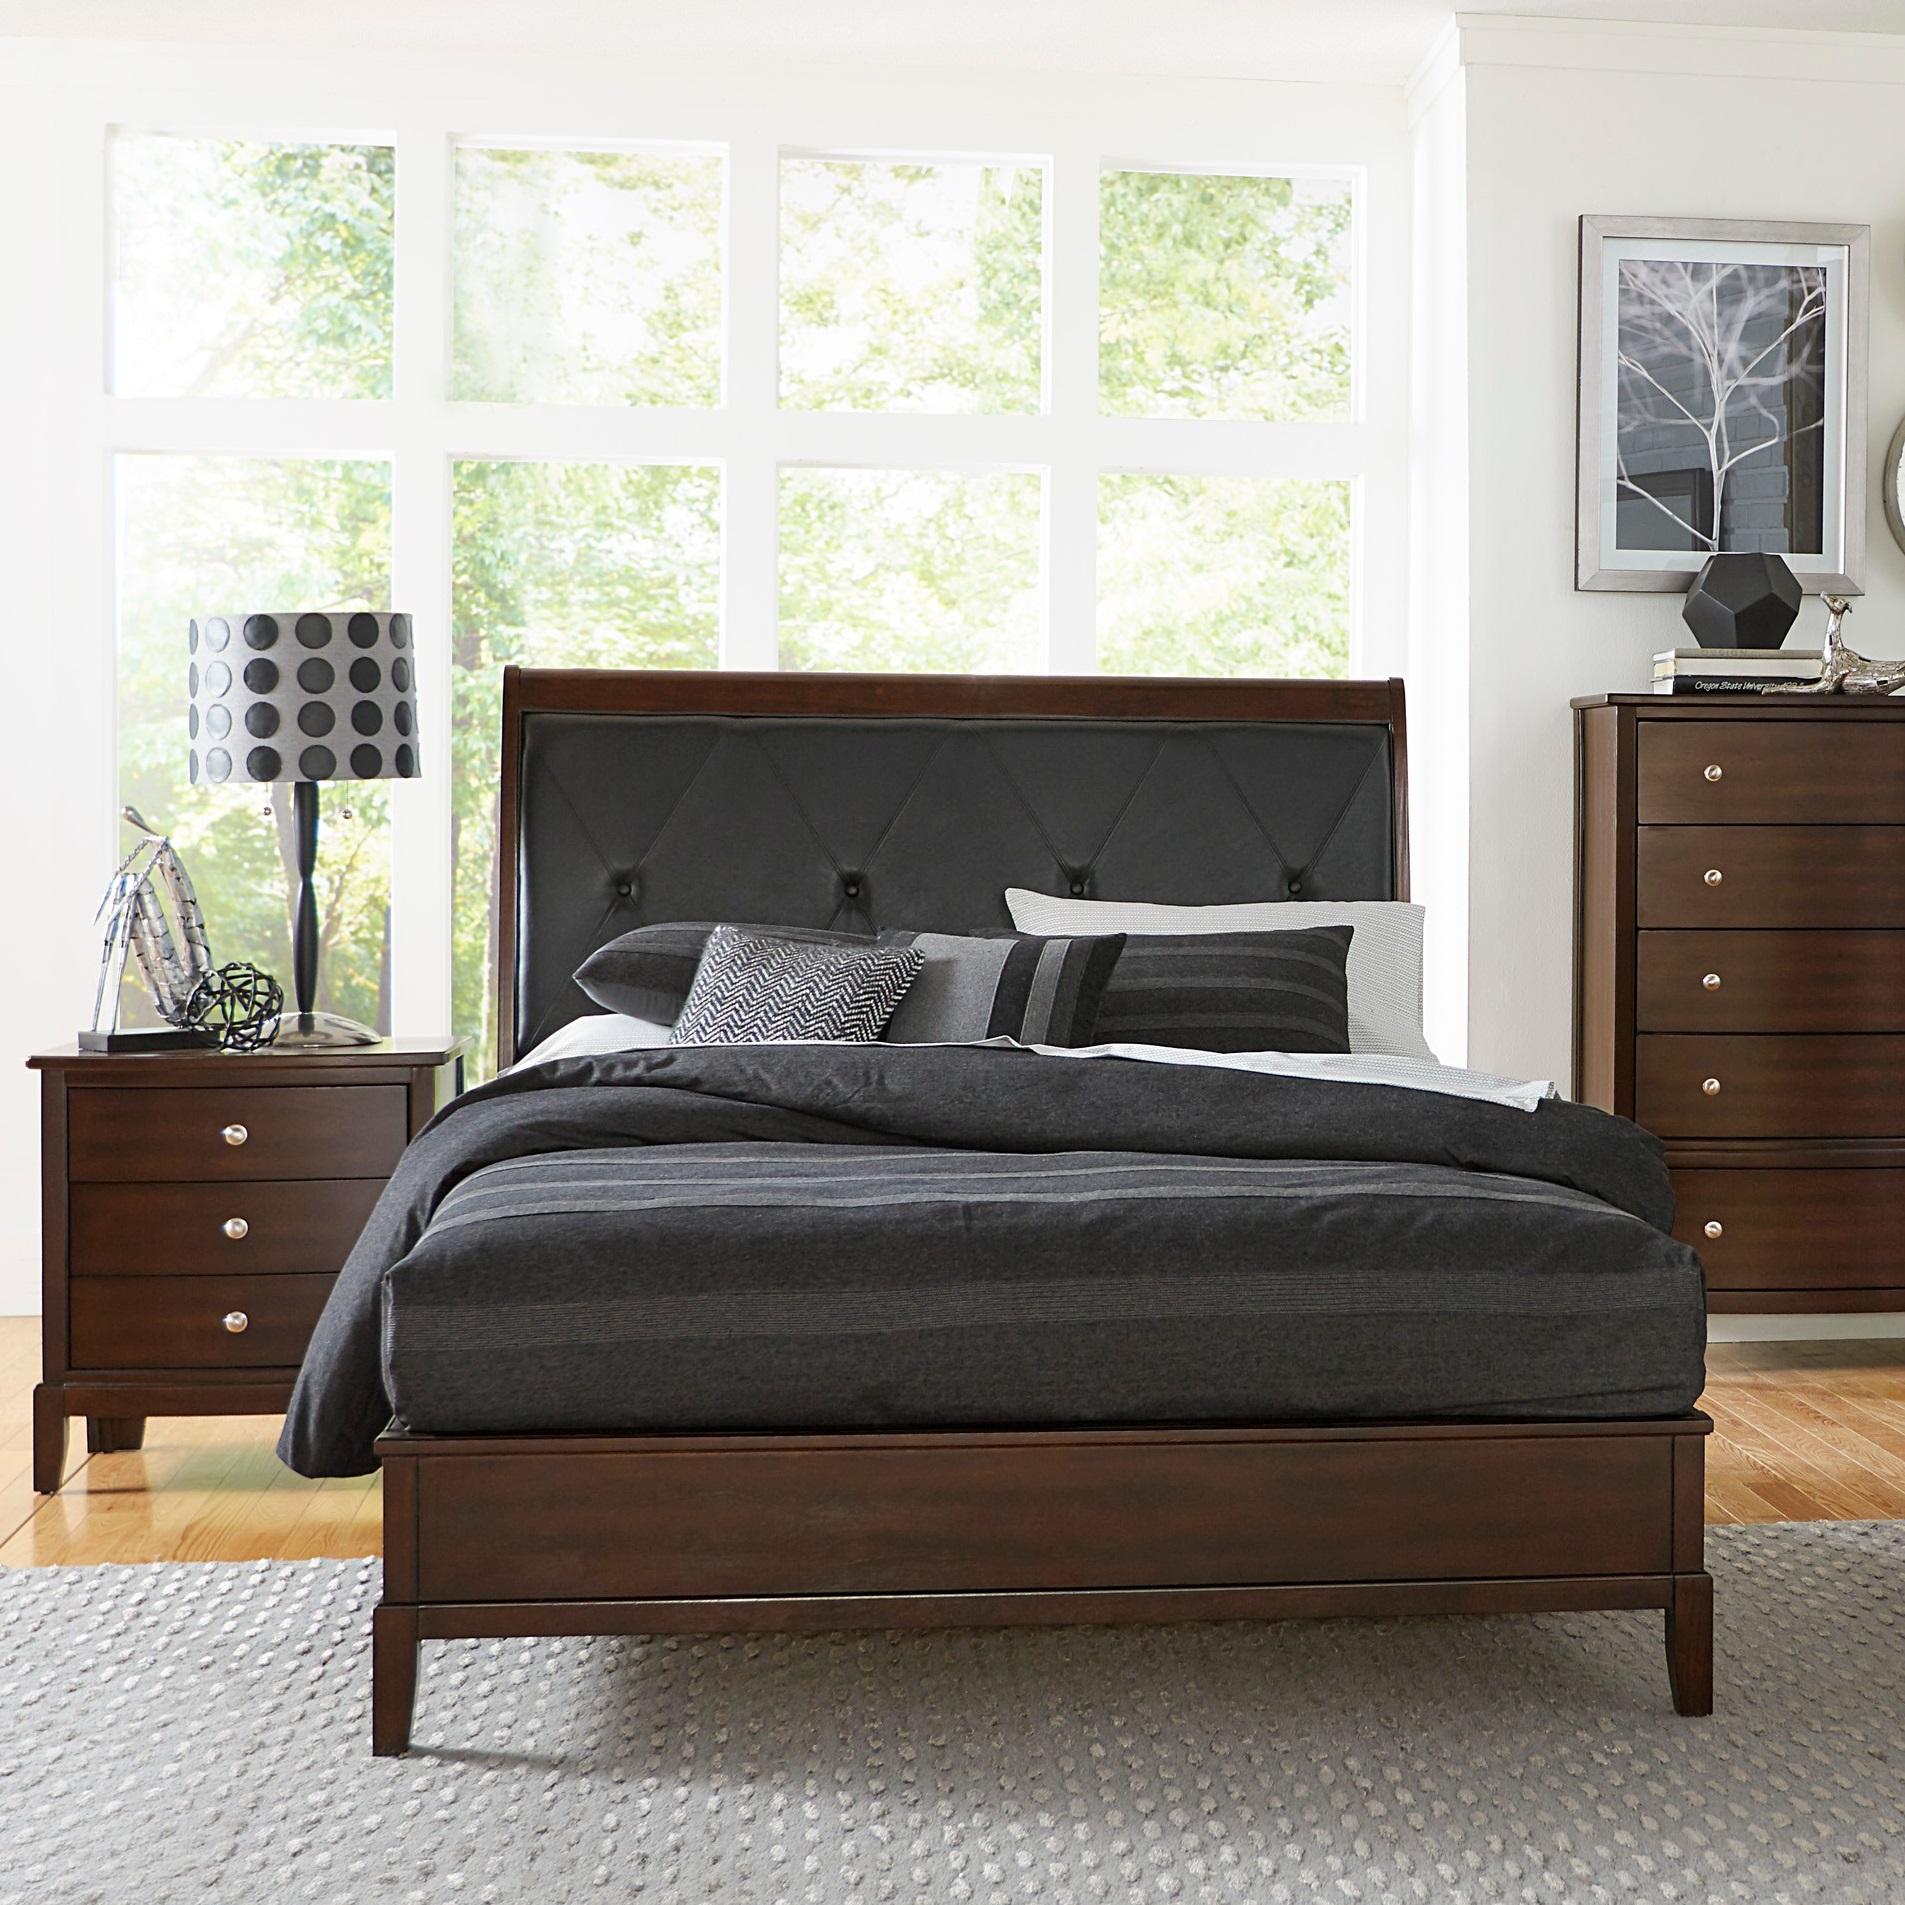 Transitional Bedroom Set 1730-1-3PC Cotterill 1730-1-3PC in Dark Cherry Faux Leather